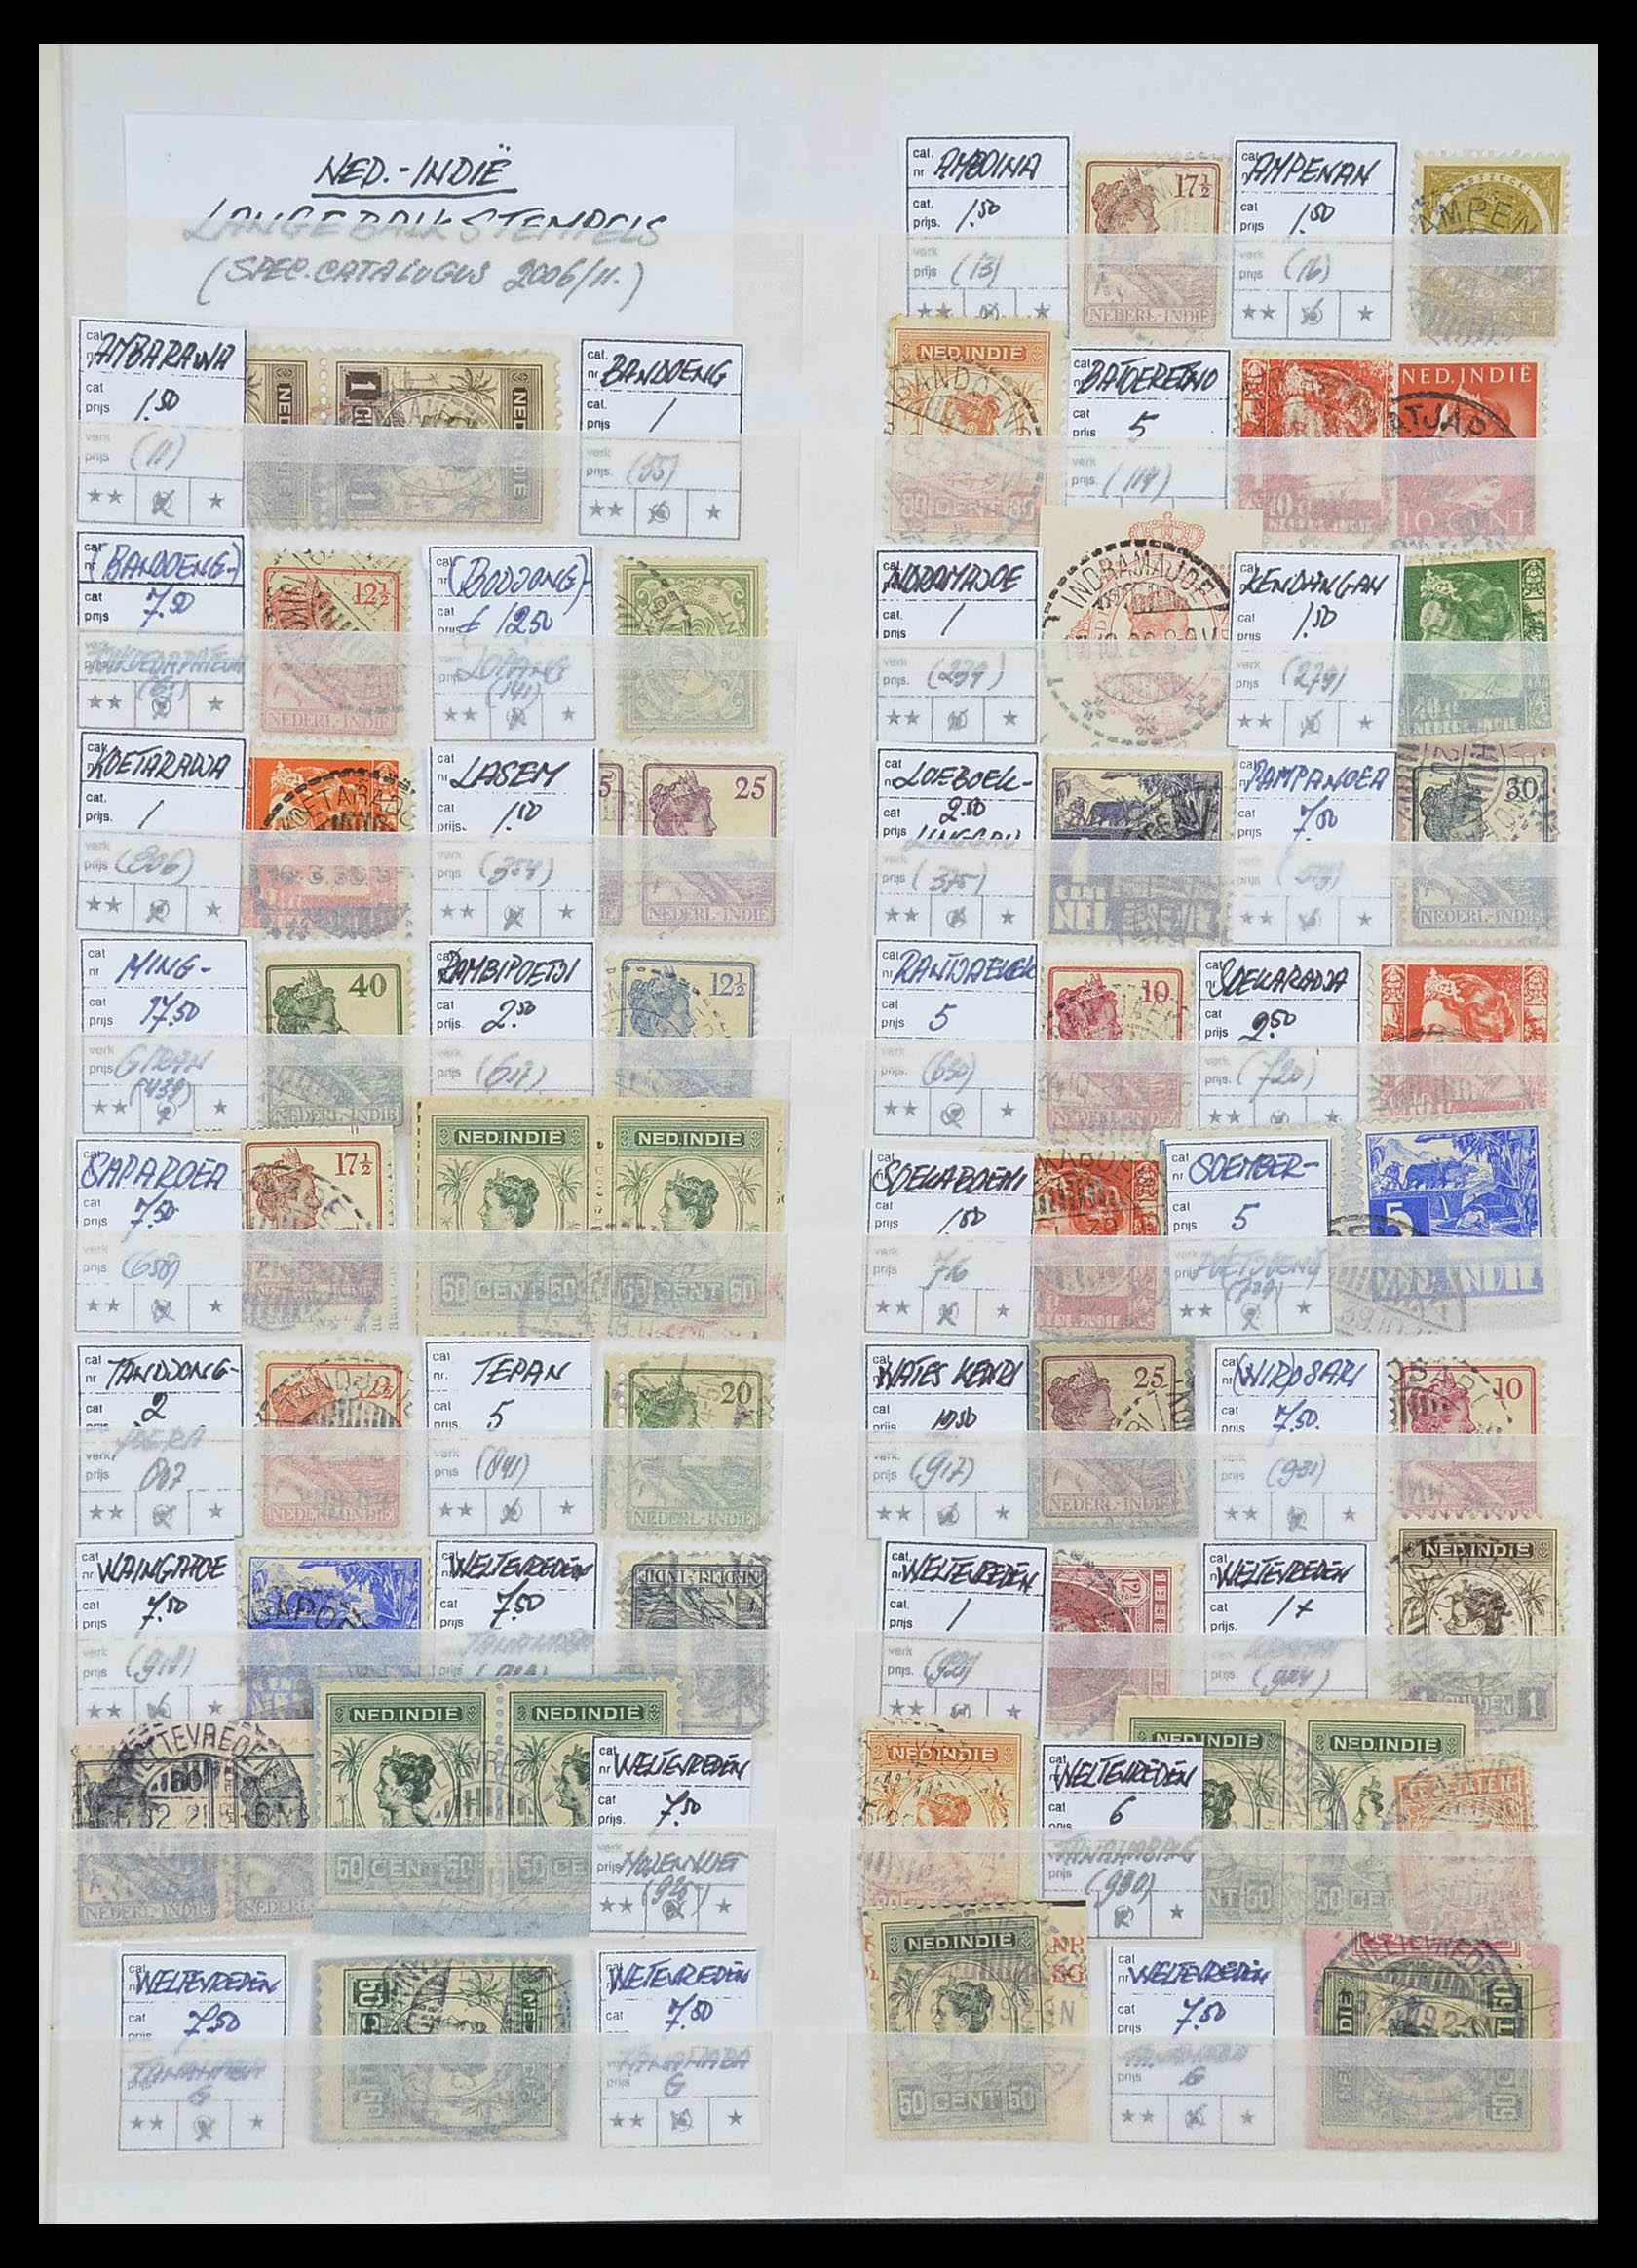 33718 013 - Stamp collection 33718 Dutch east Indies cancels.